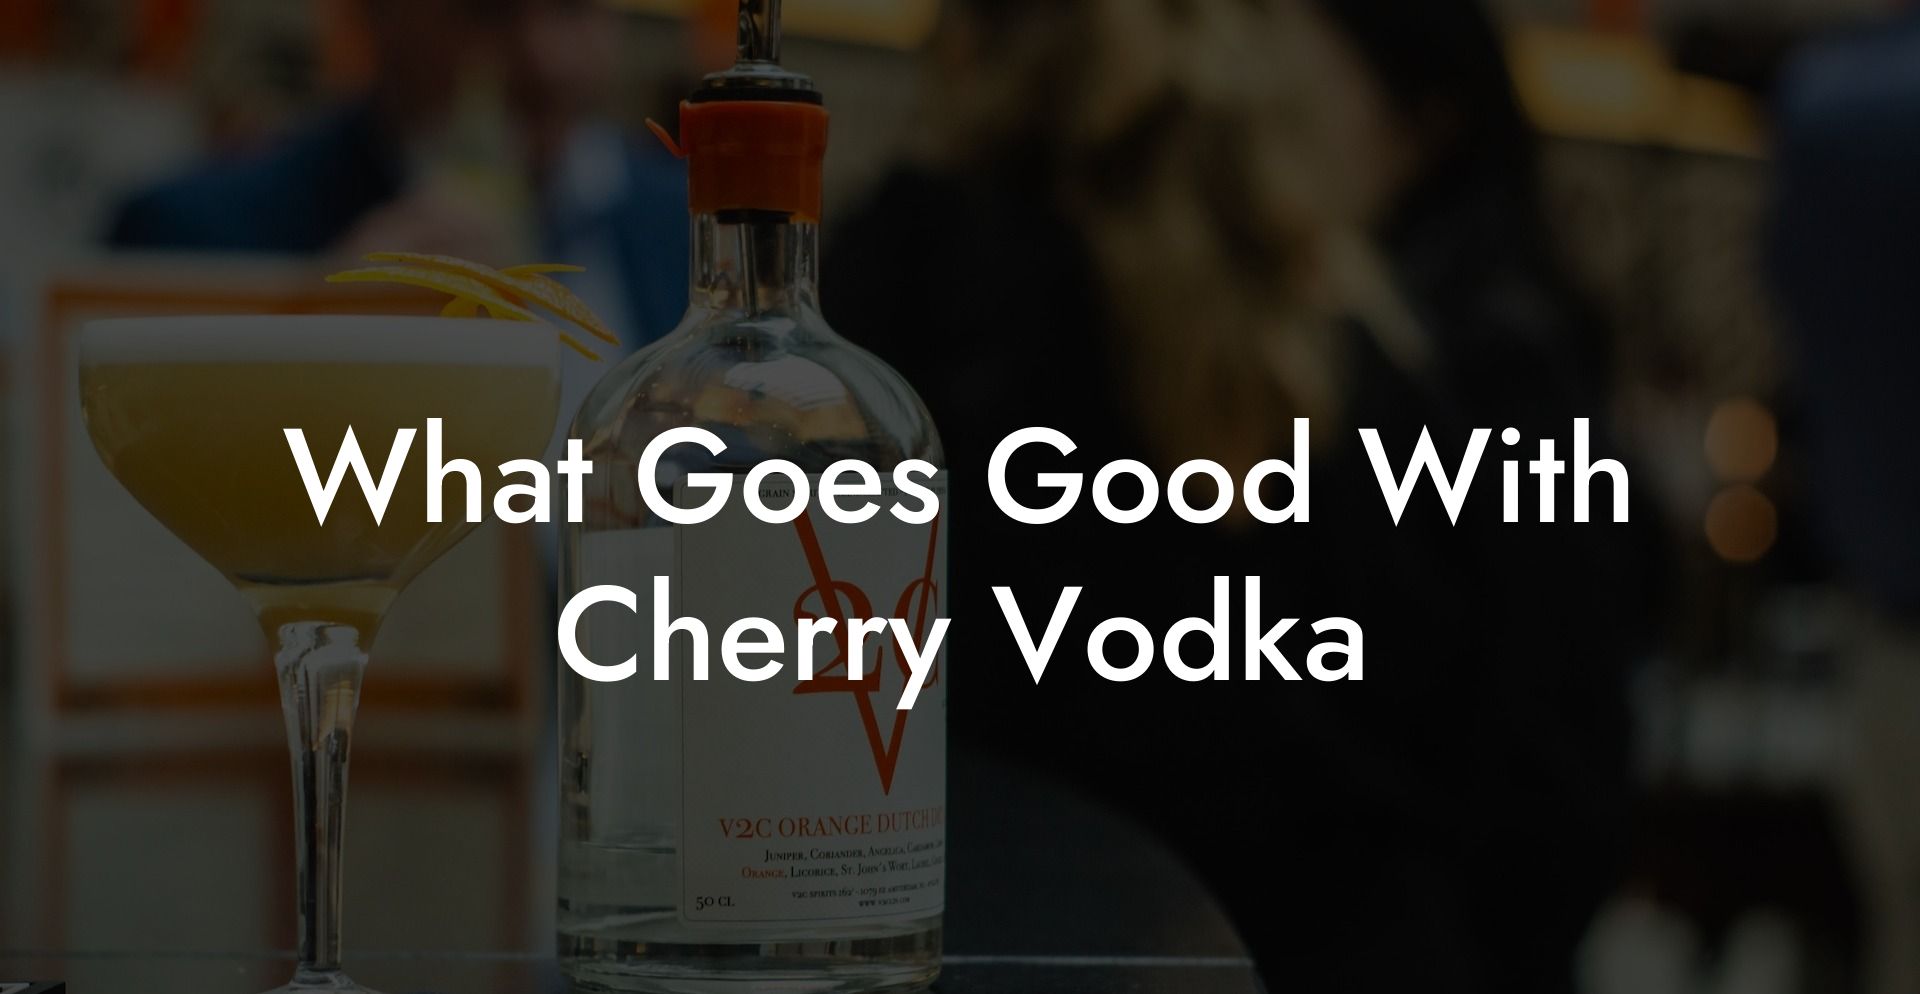 What Goes Good With Cherry Vodka